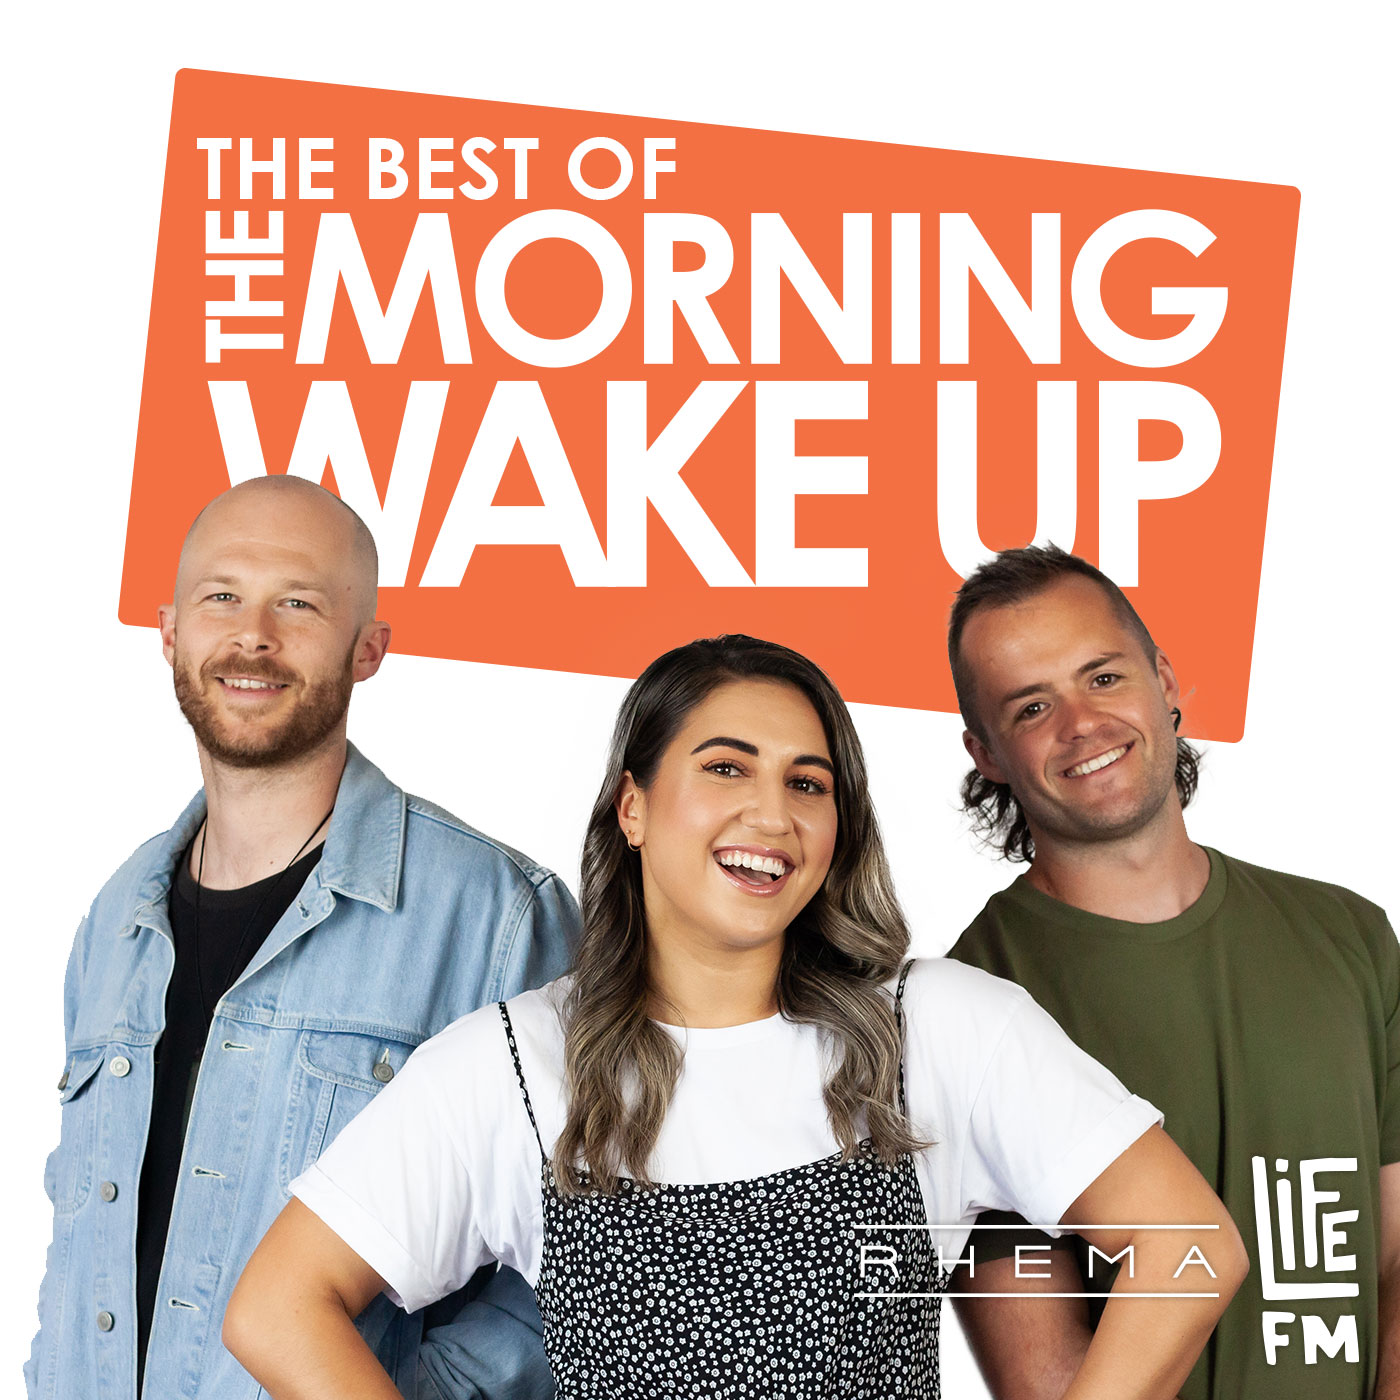 The Morning Wake Up Grand Finale Special: Leanna, Bjorn and Josh